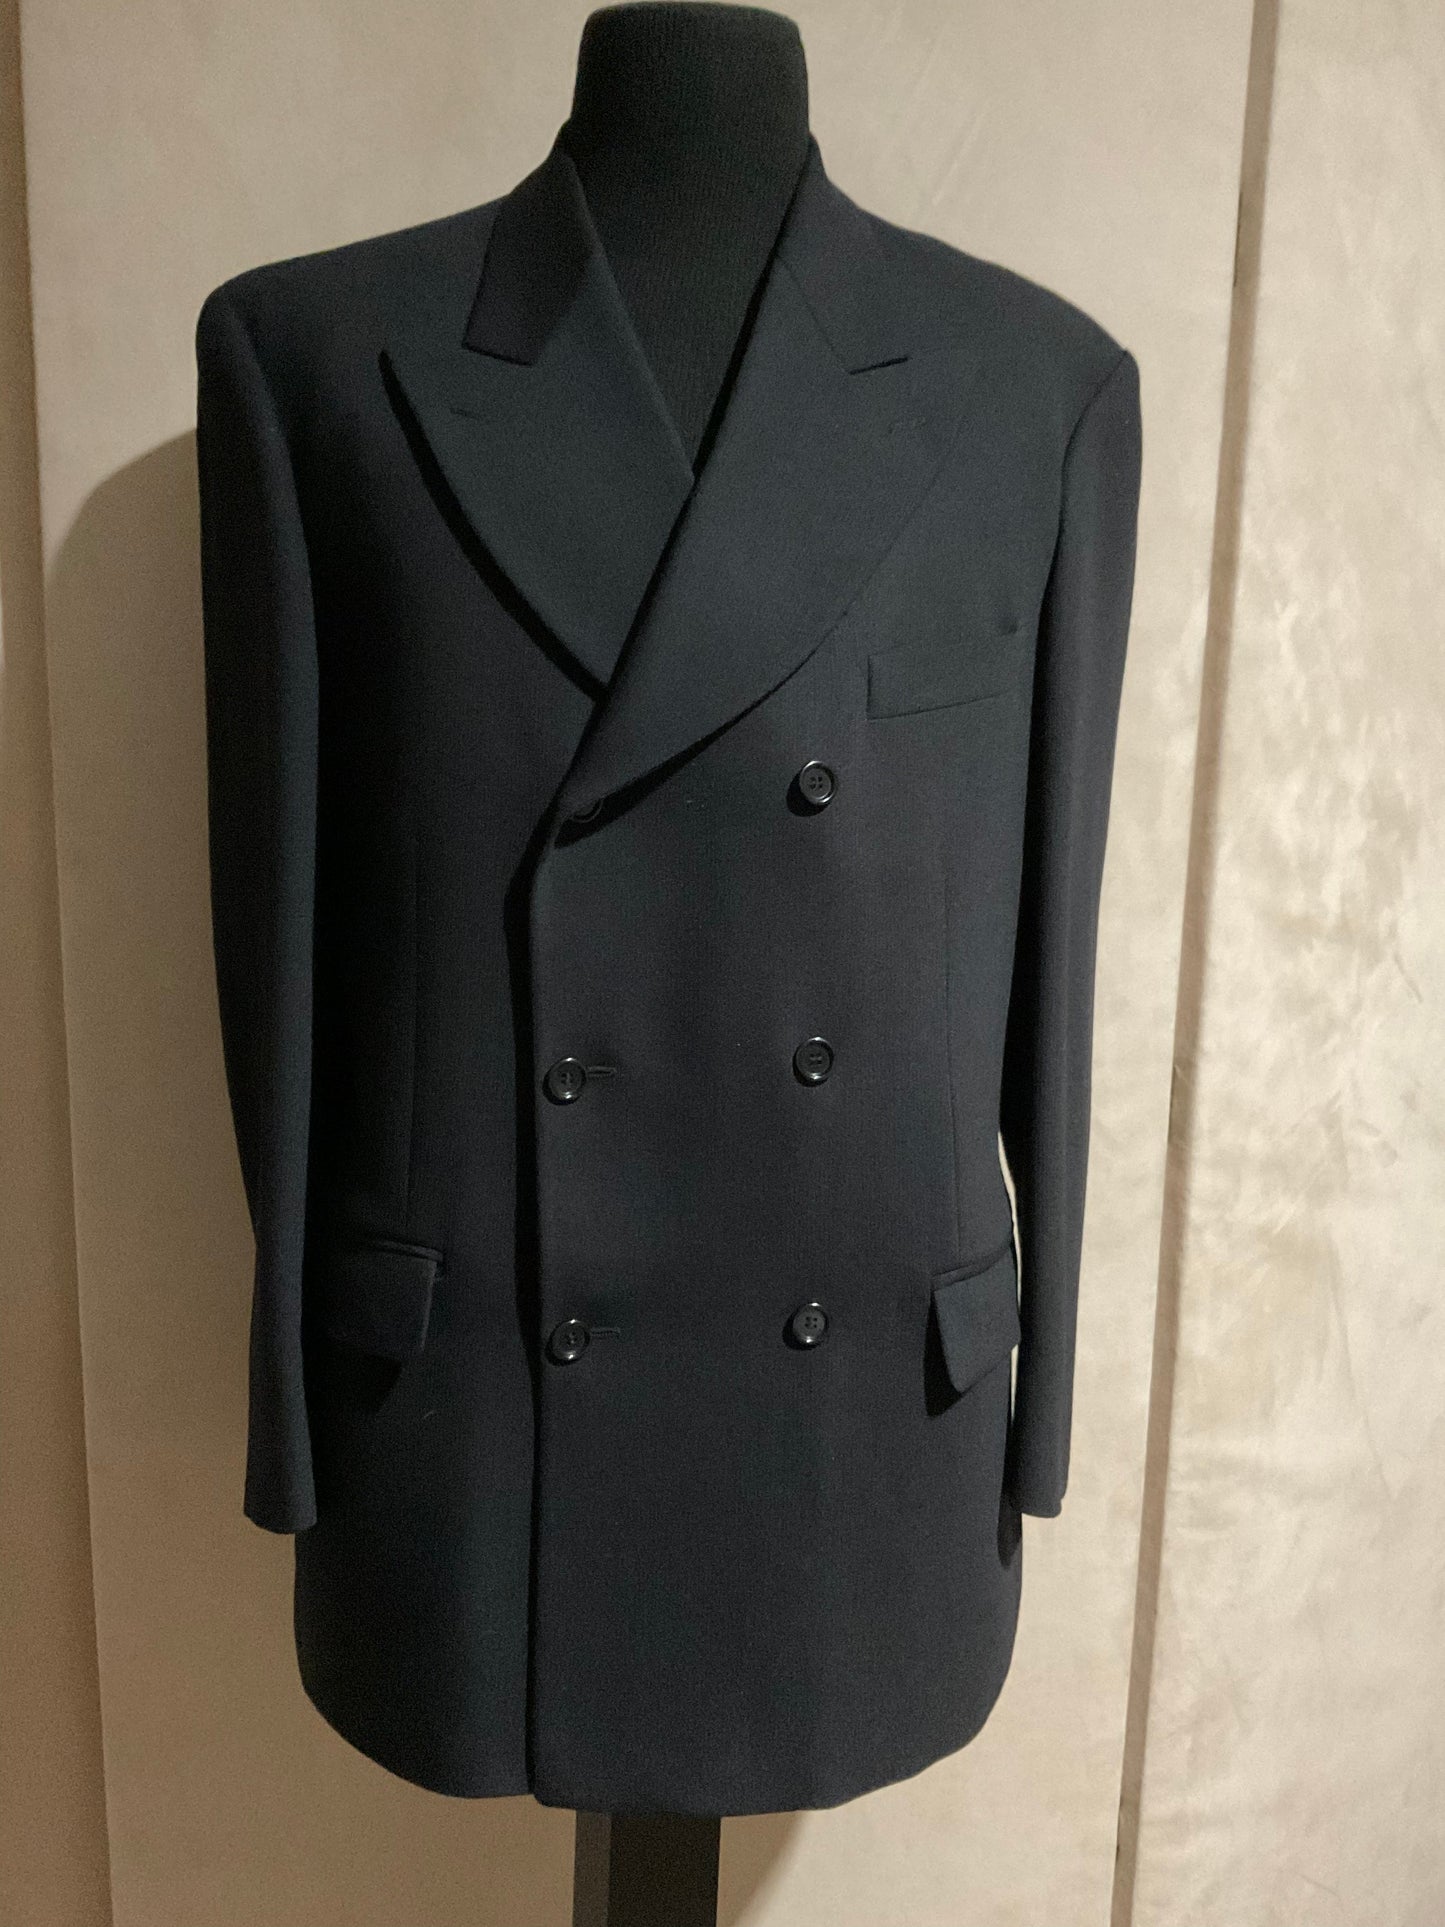 R P SUIT / 6 BUTTON DOUBLE BREASTED / BLACK / 40 REG OR LONG / MADE IN ITALY